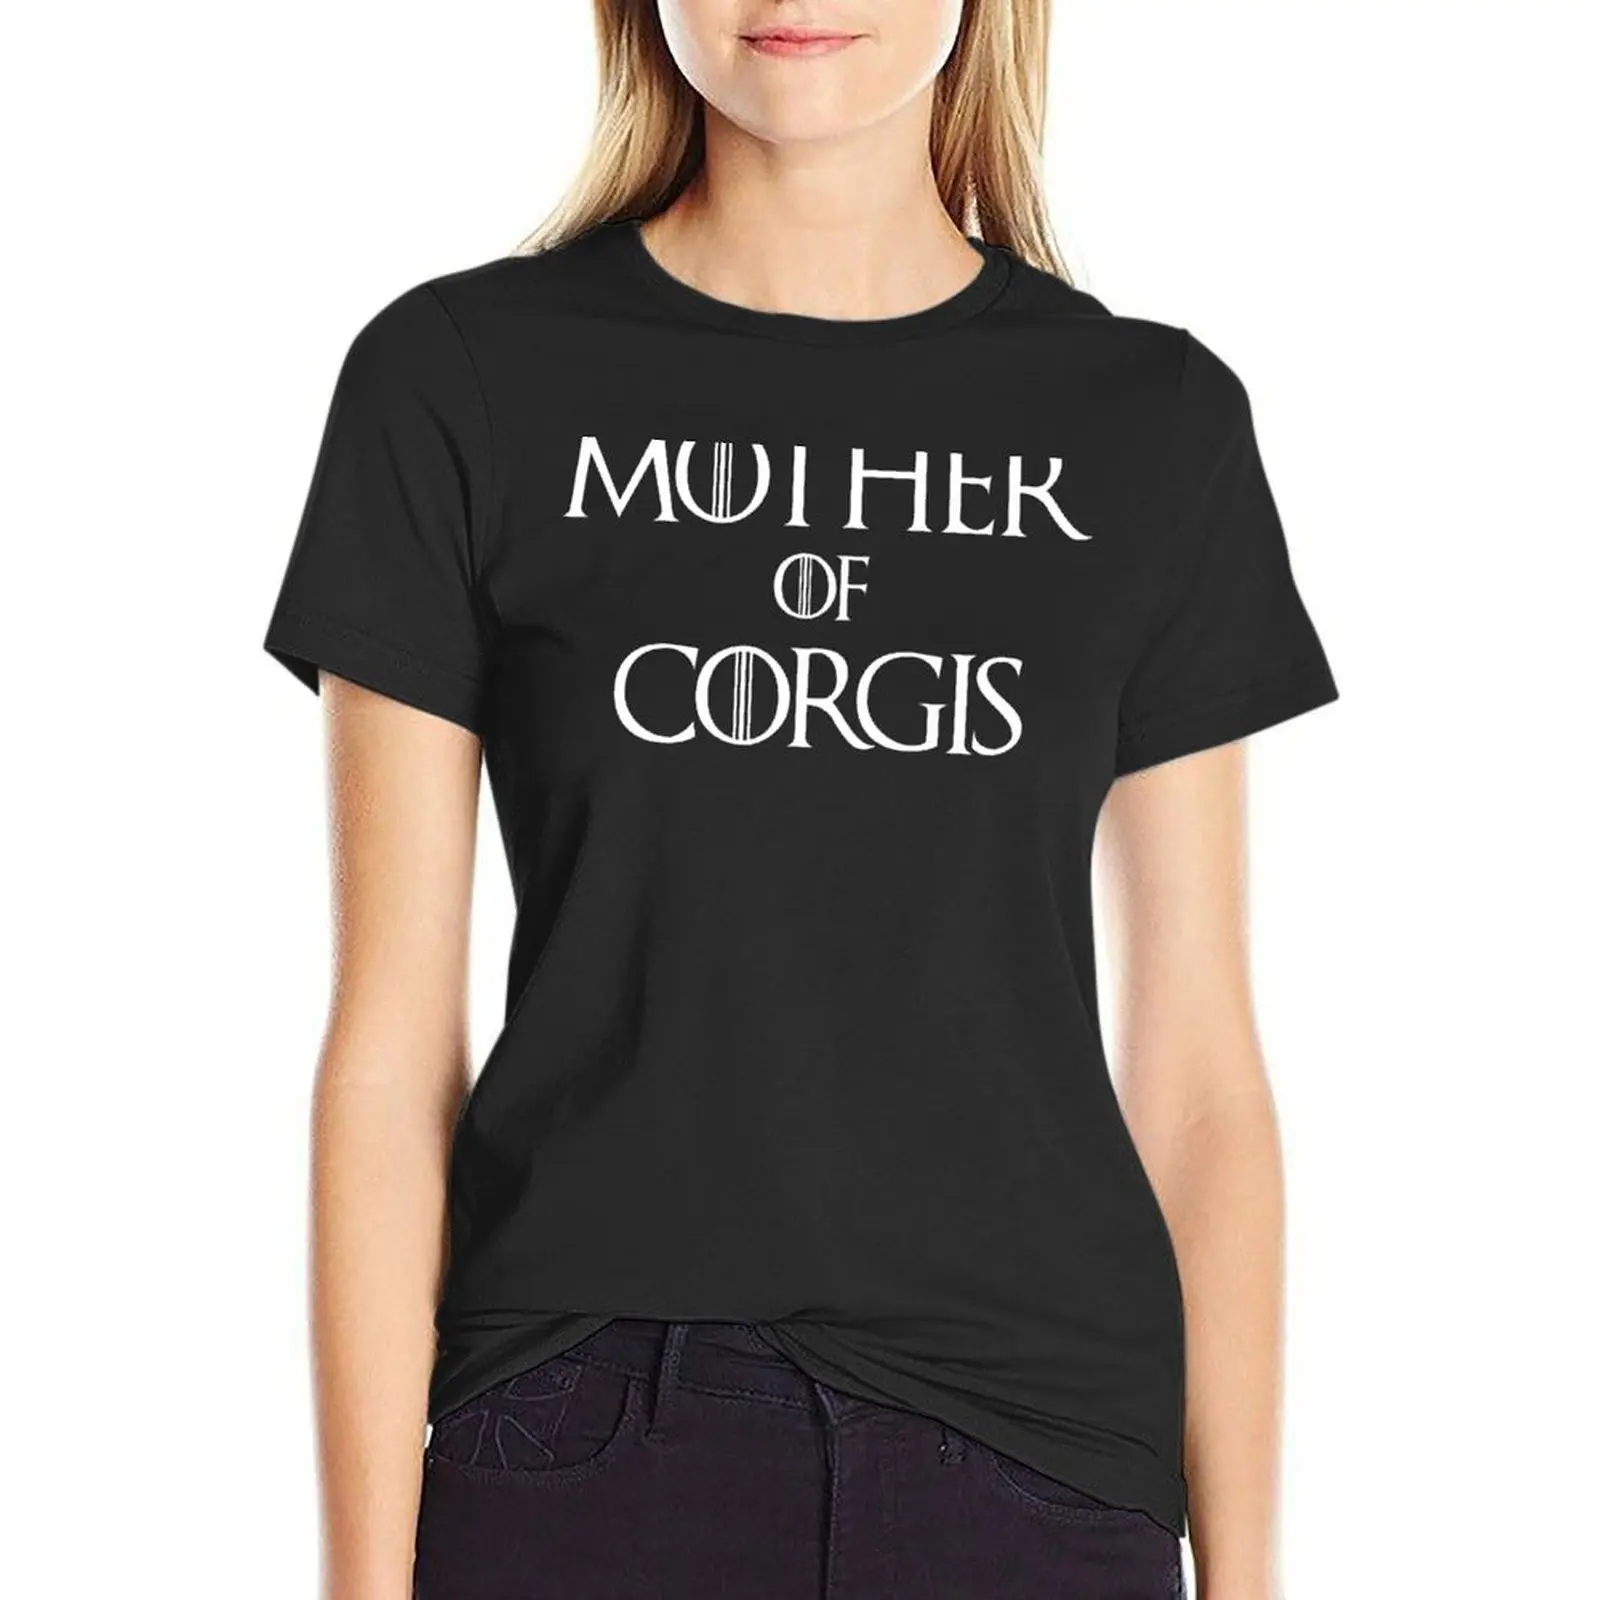 

Mother of Corgis T Shirt T-Shirt oversized anime clothes quick-drying graphics funny t shirts for Women